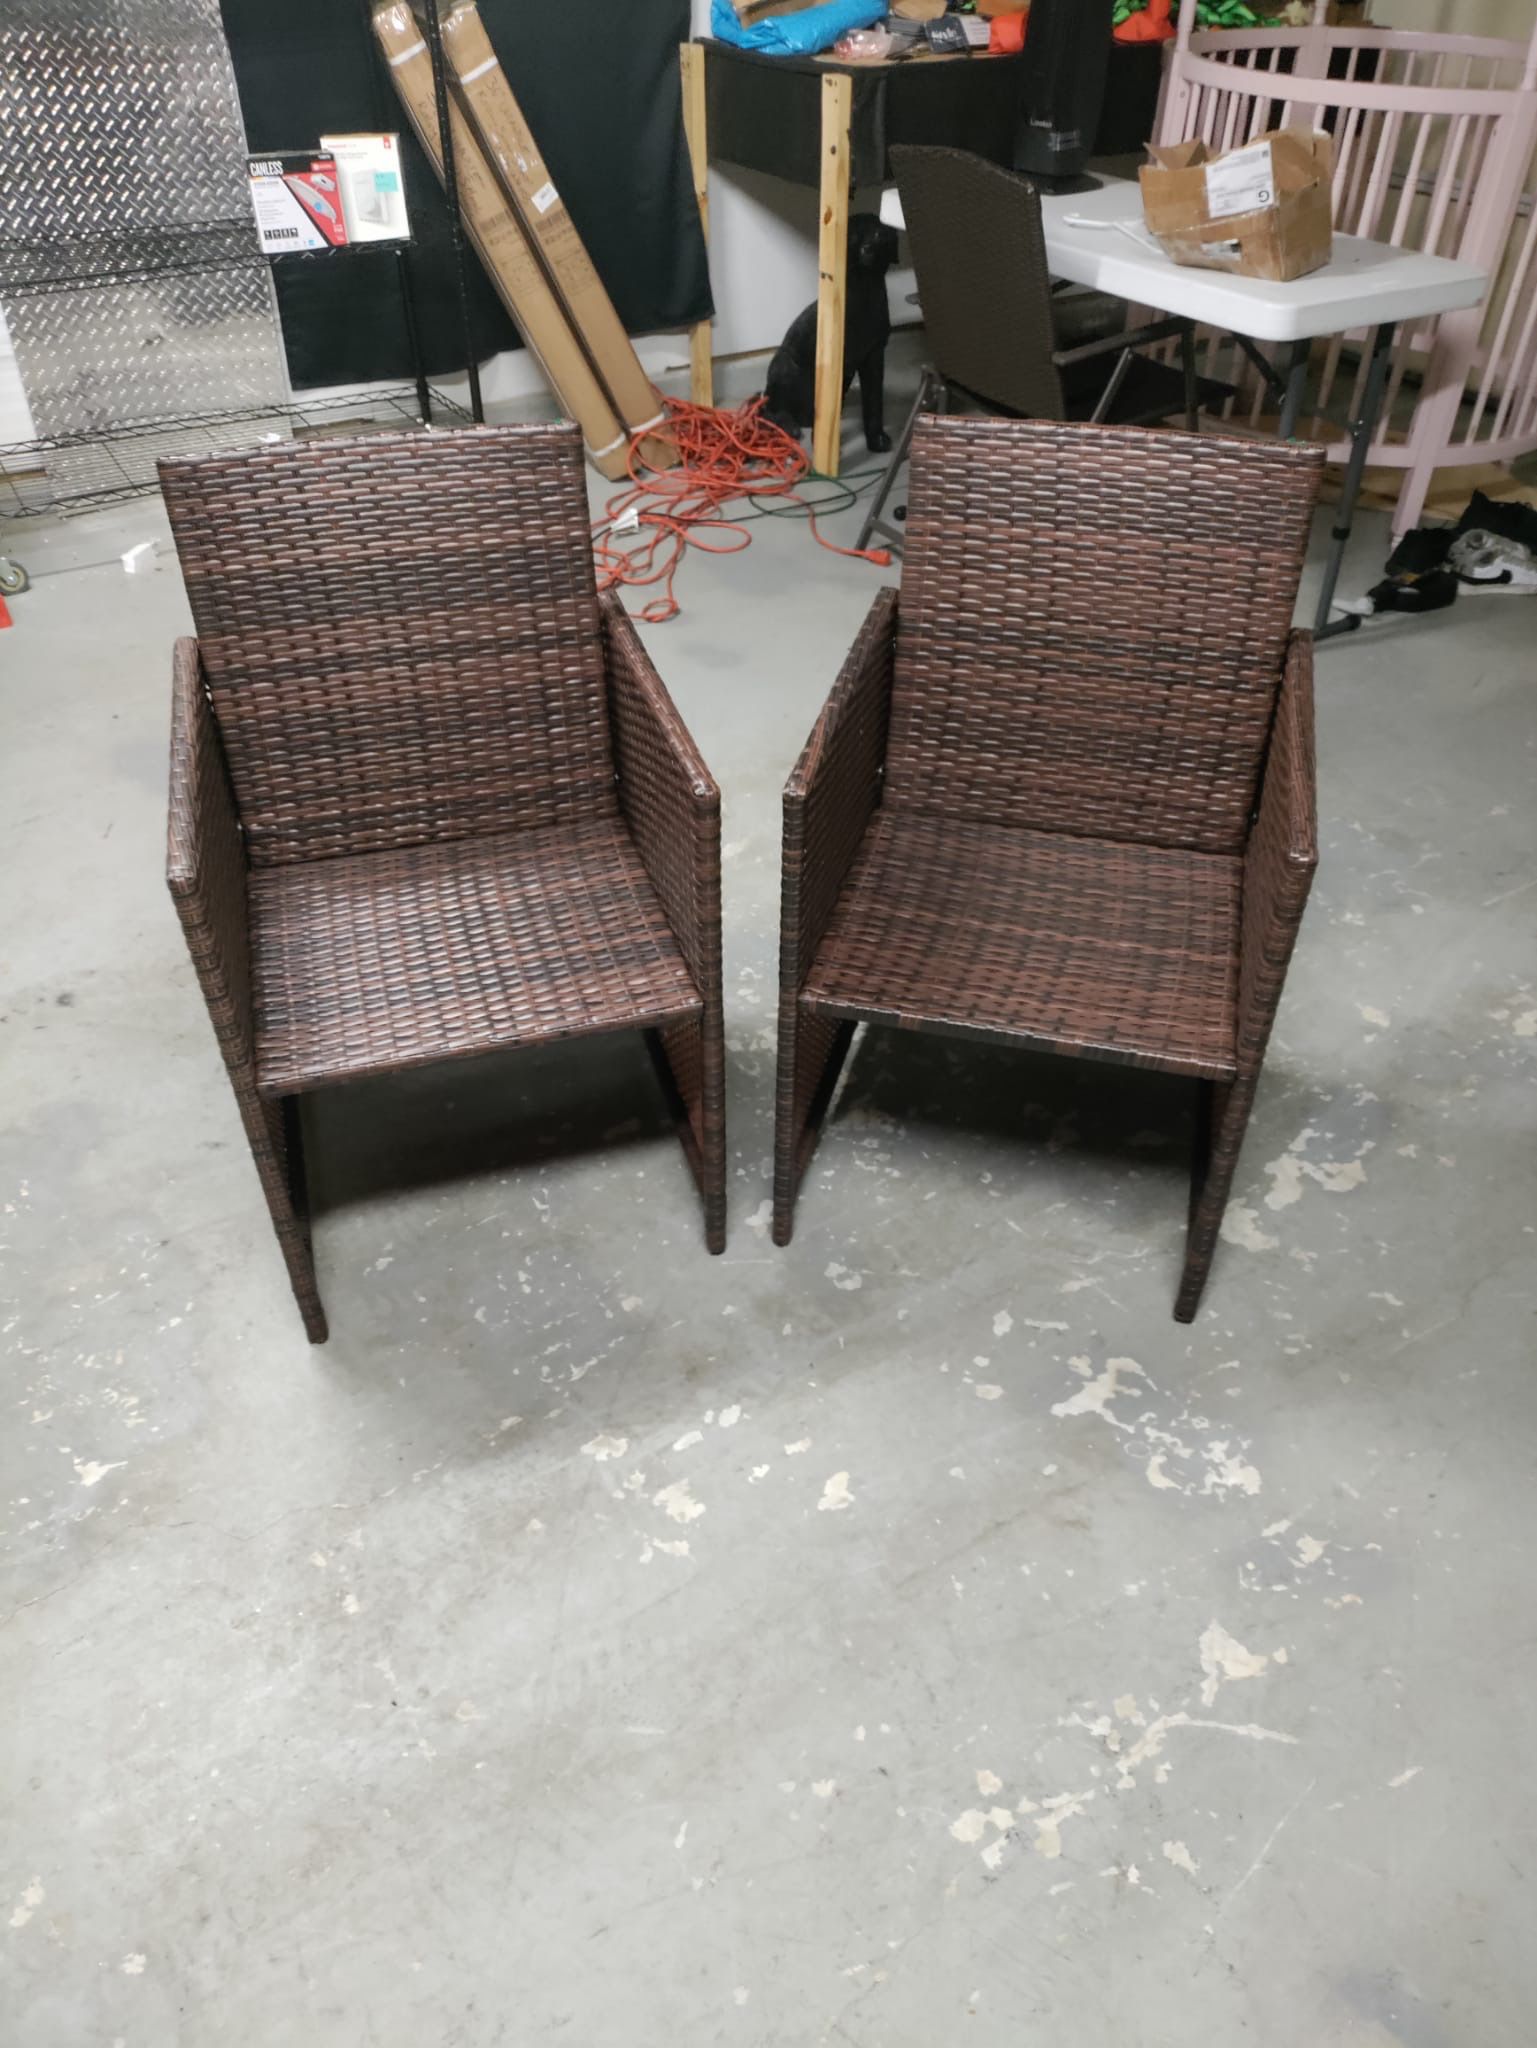 Set Of Outdoor Wicker Patio Chairs